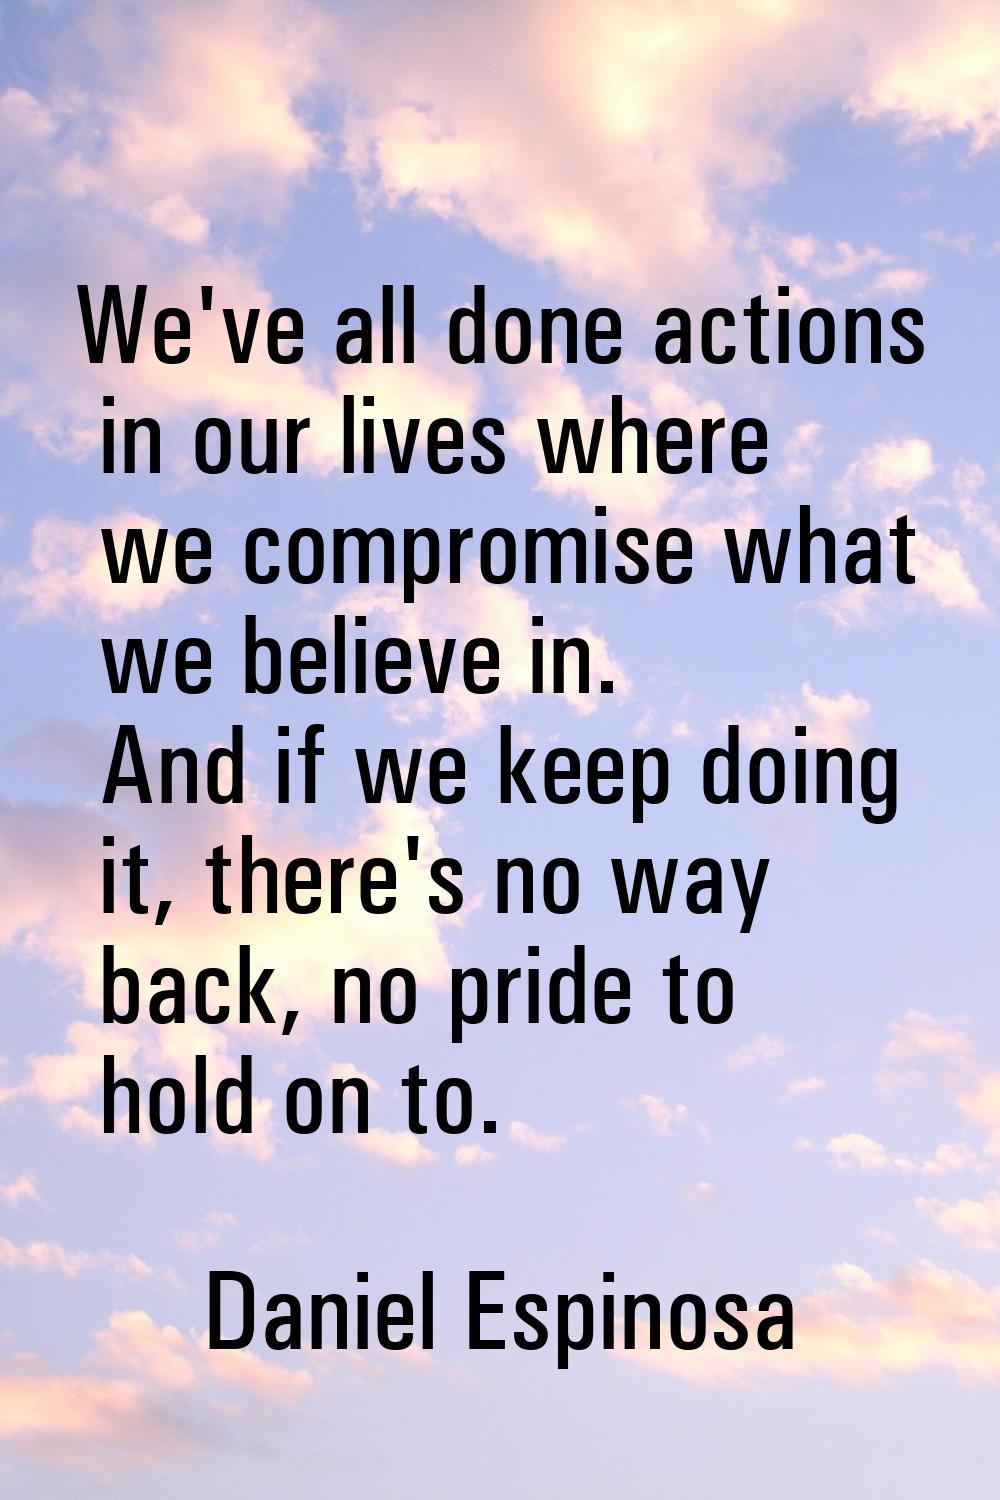 We've all done actions in our lives where we compromise what we believe in. And if we keep doing it